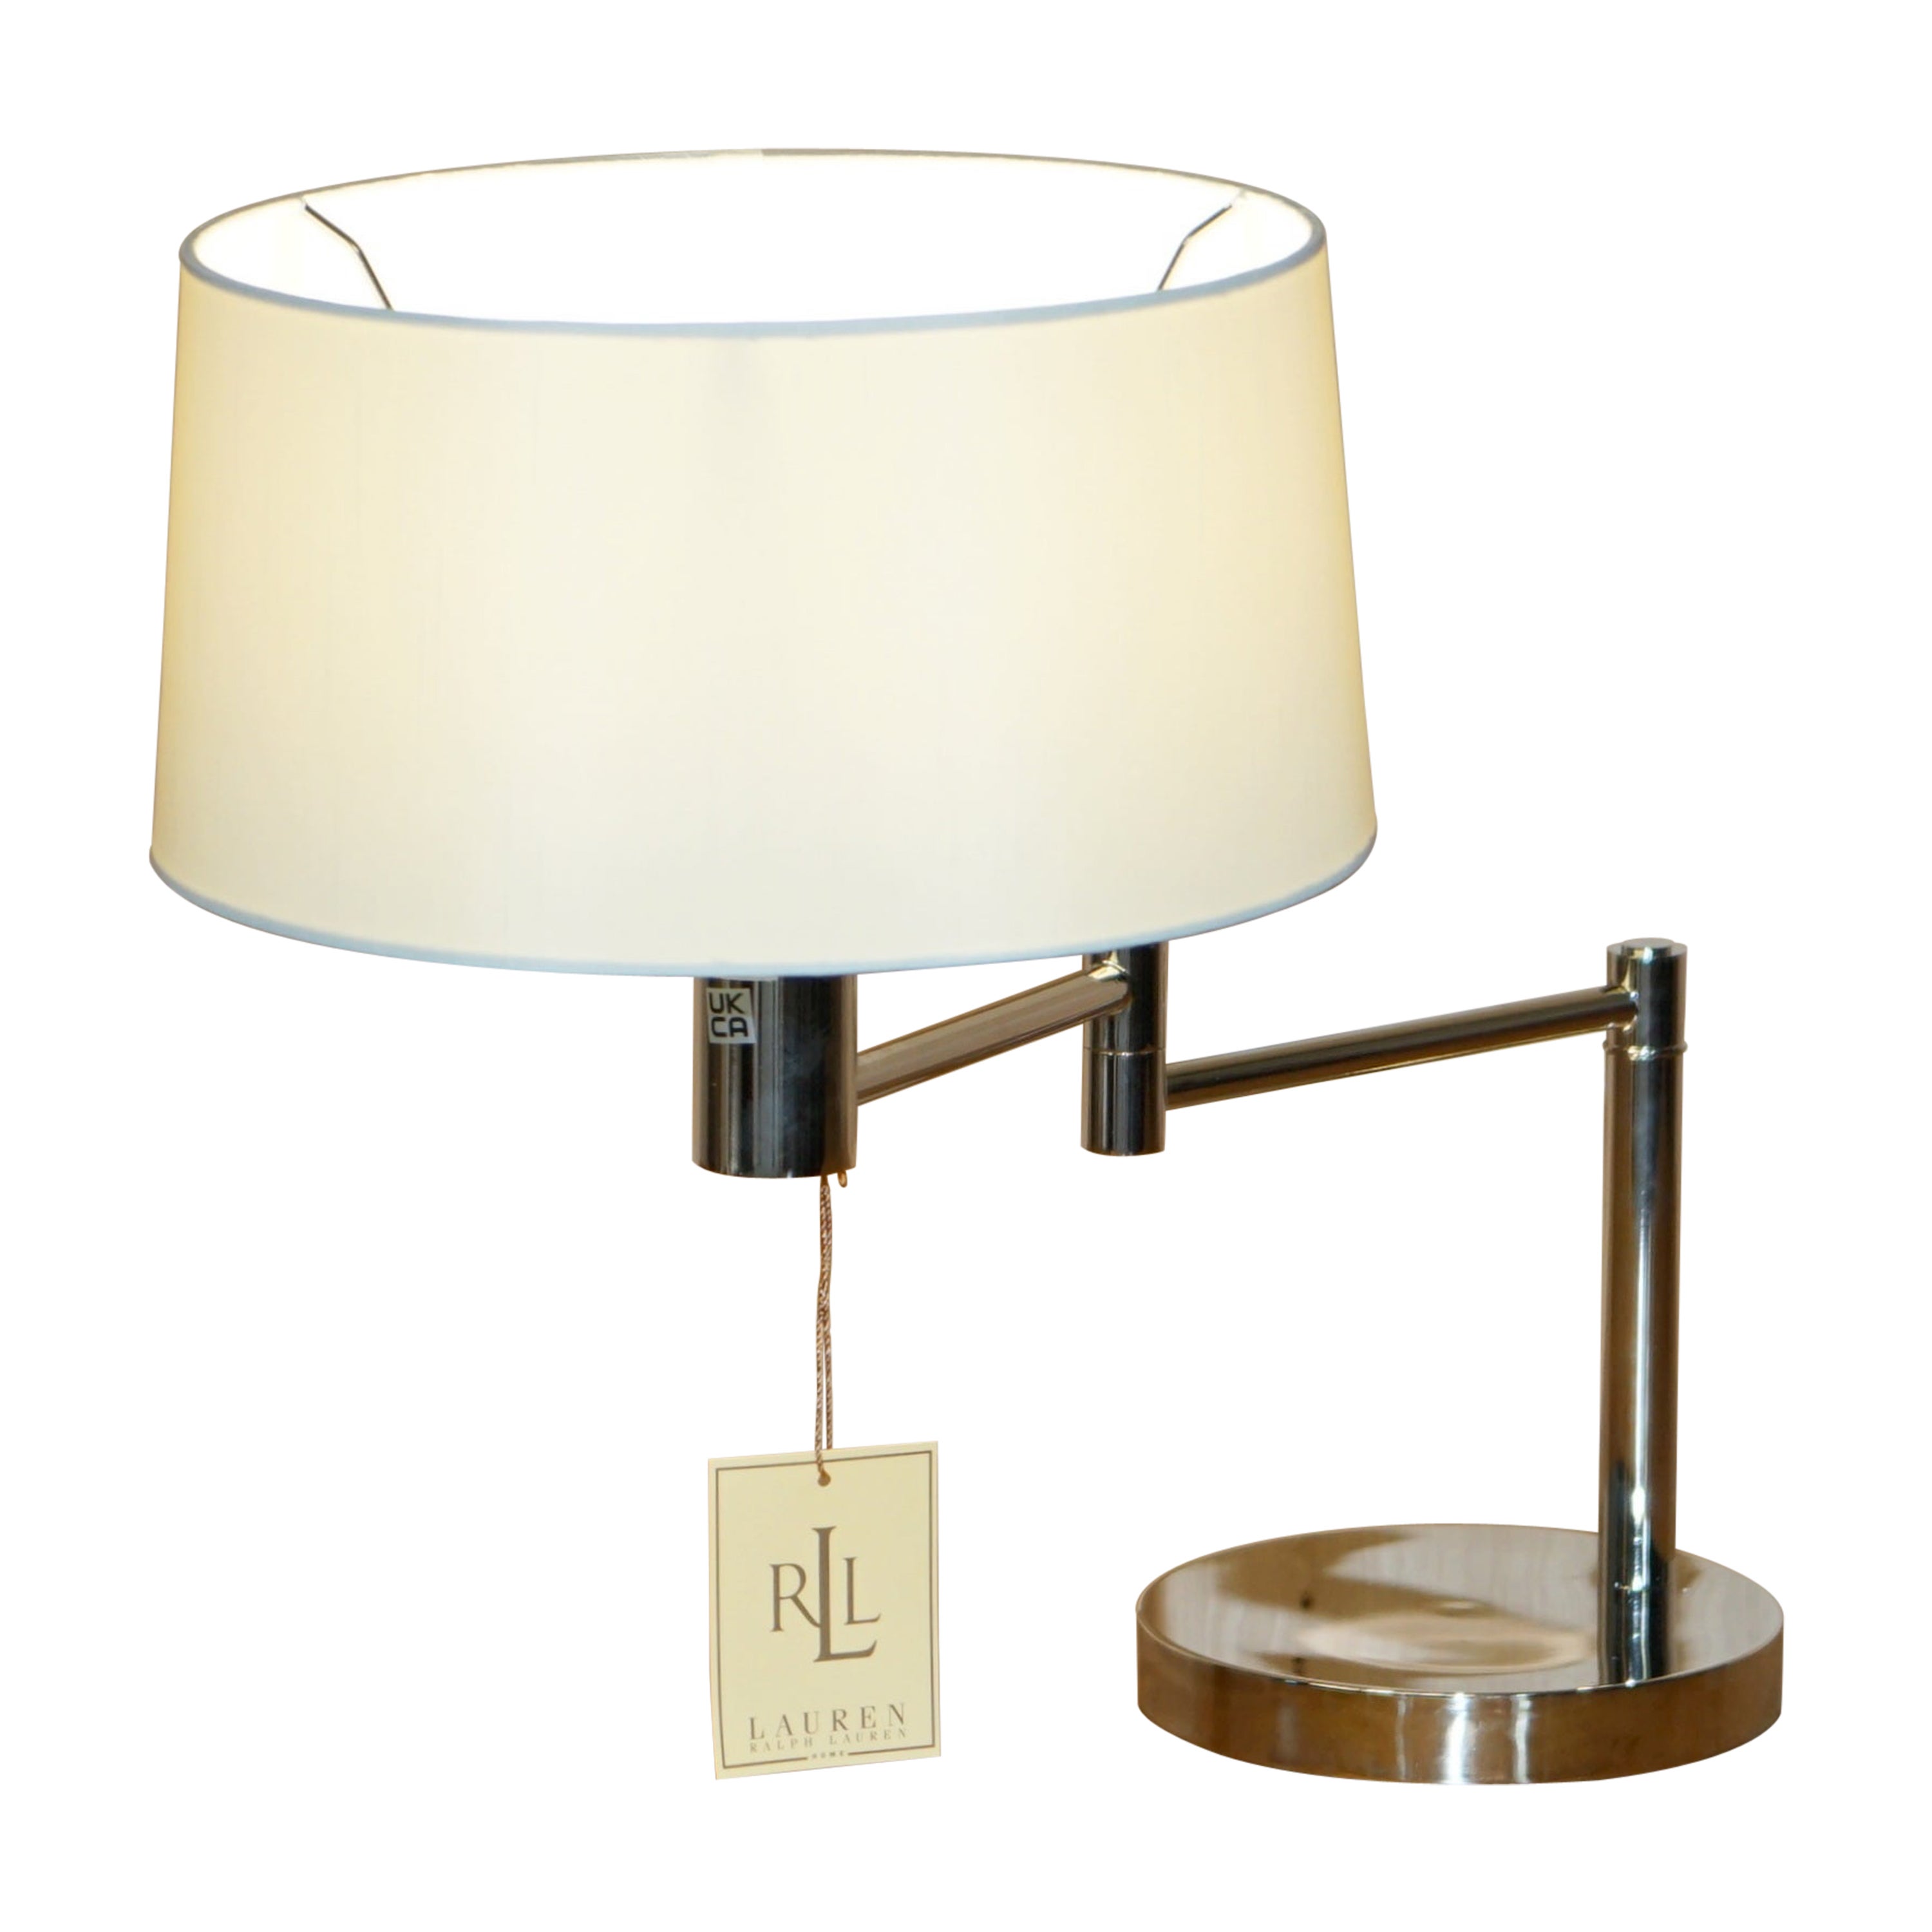 1 OF 2 BNIB ORIGINAL RALPH LAUREN ARTICULATED SWiNG ARM TABLE LAMPS For  Sale at 1stDibs